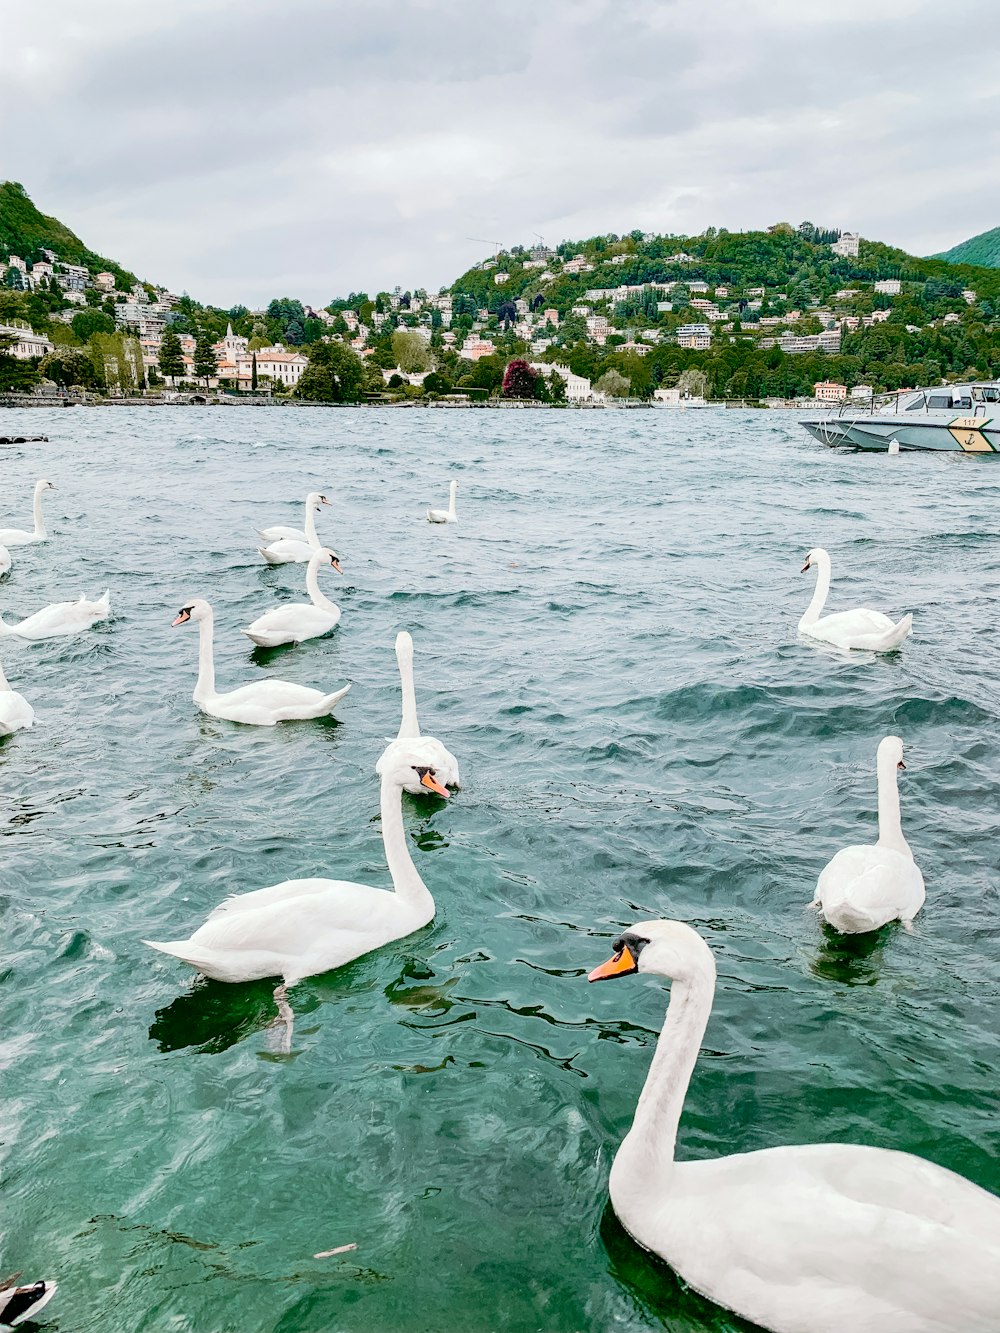 flock of white swan on body of water during daytime